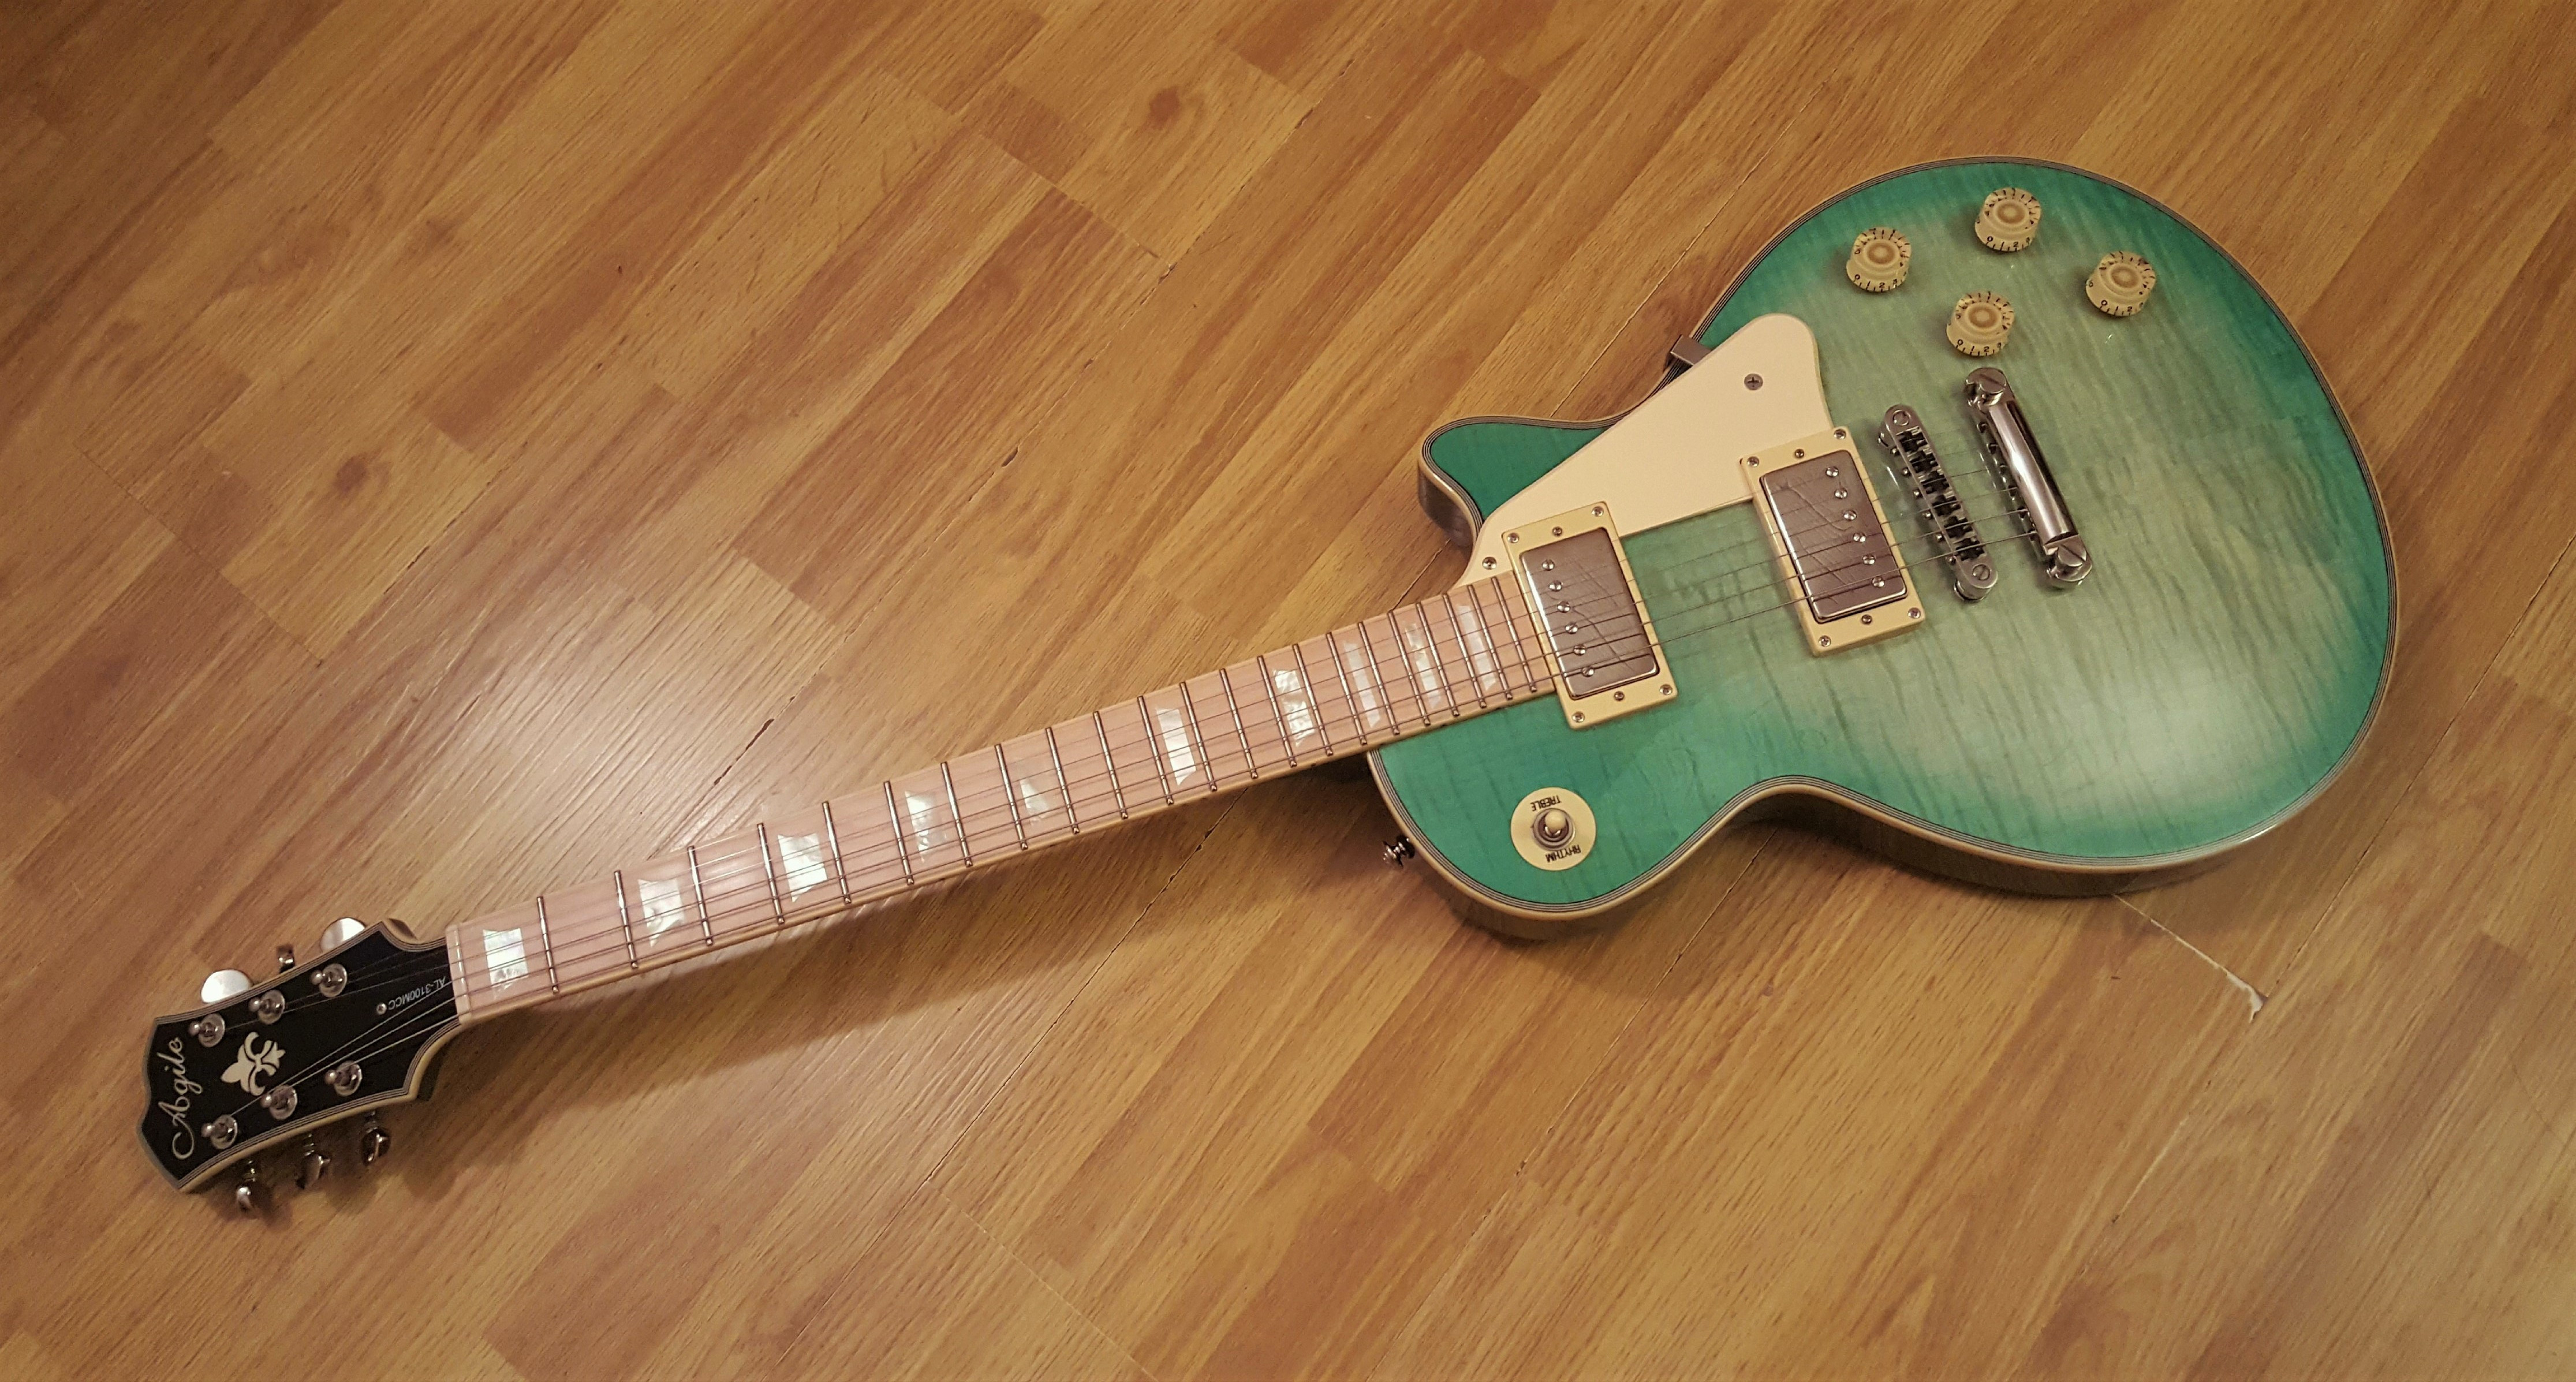 NGD: 2018 AL-3100MCC Oceanburst Flame MN - A Guitar And Gear Support Forum